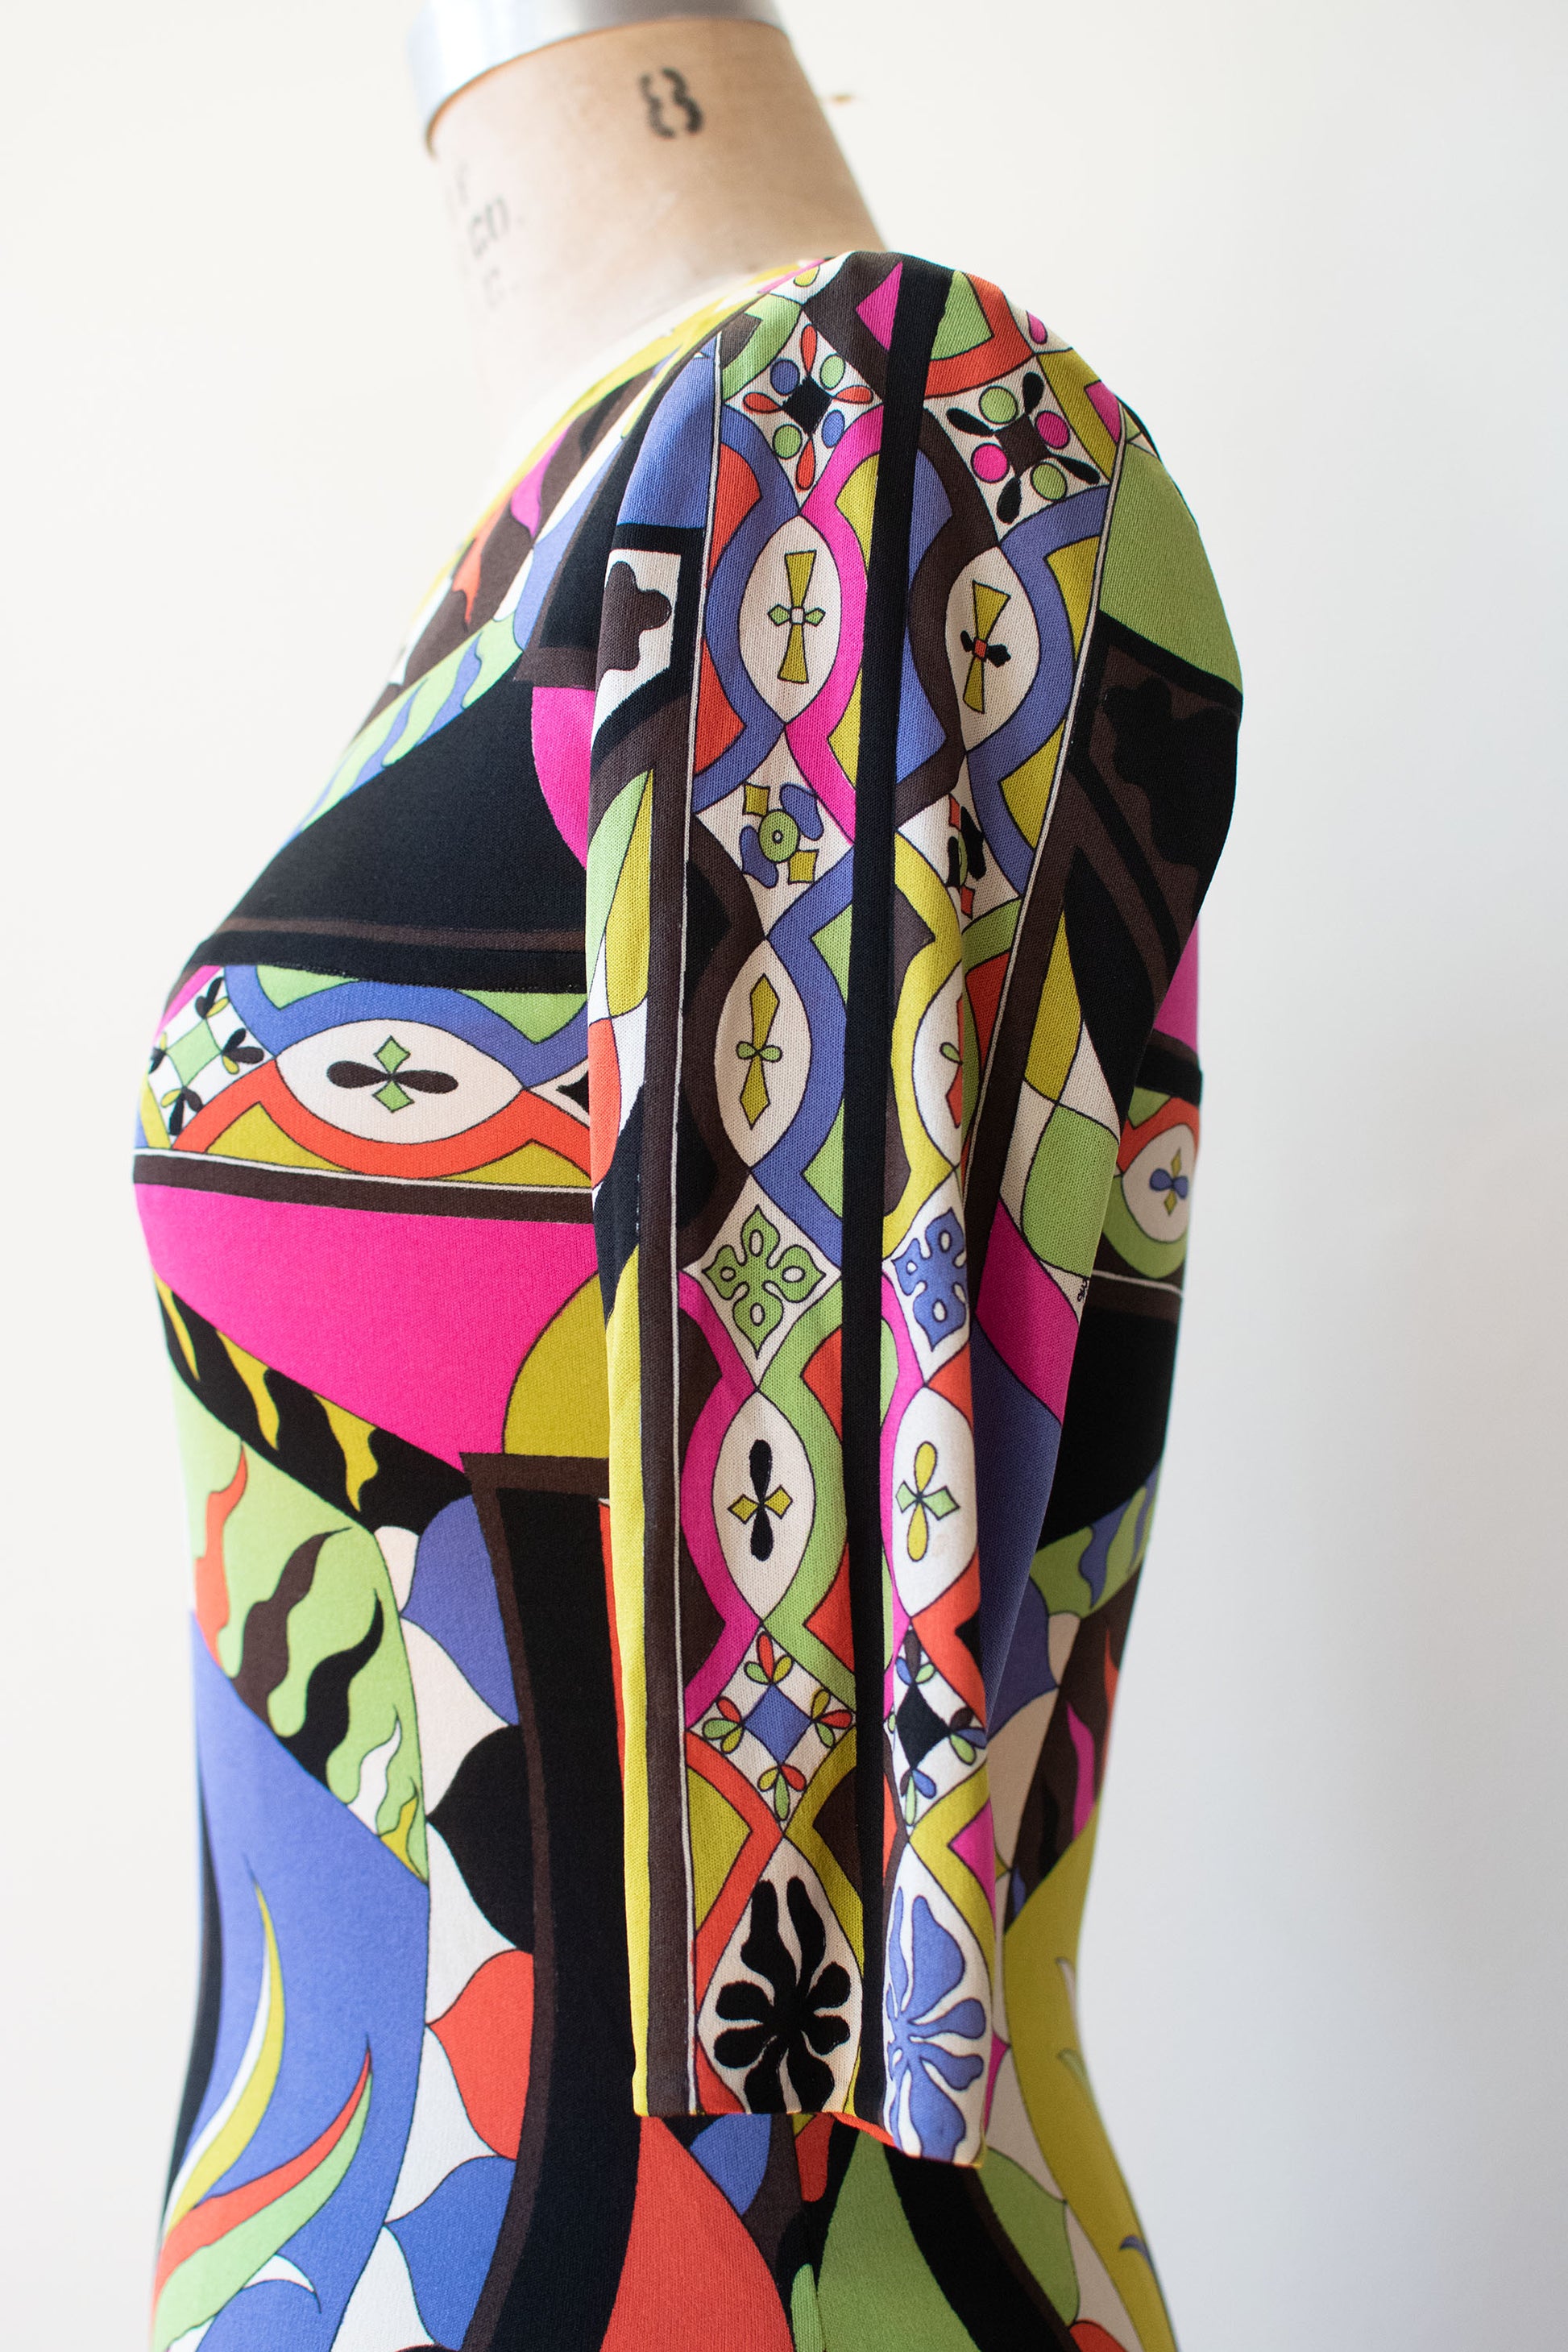 1960s Vintage Clothing Emilio Pucci for Women for sale